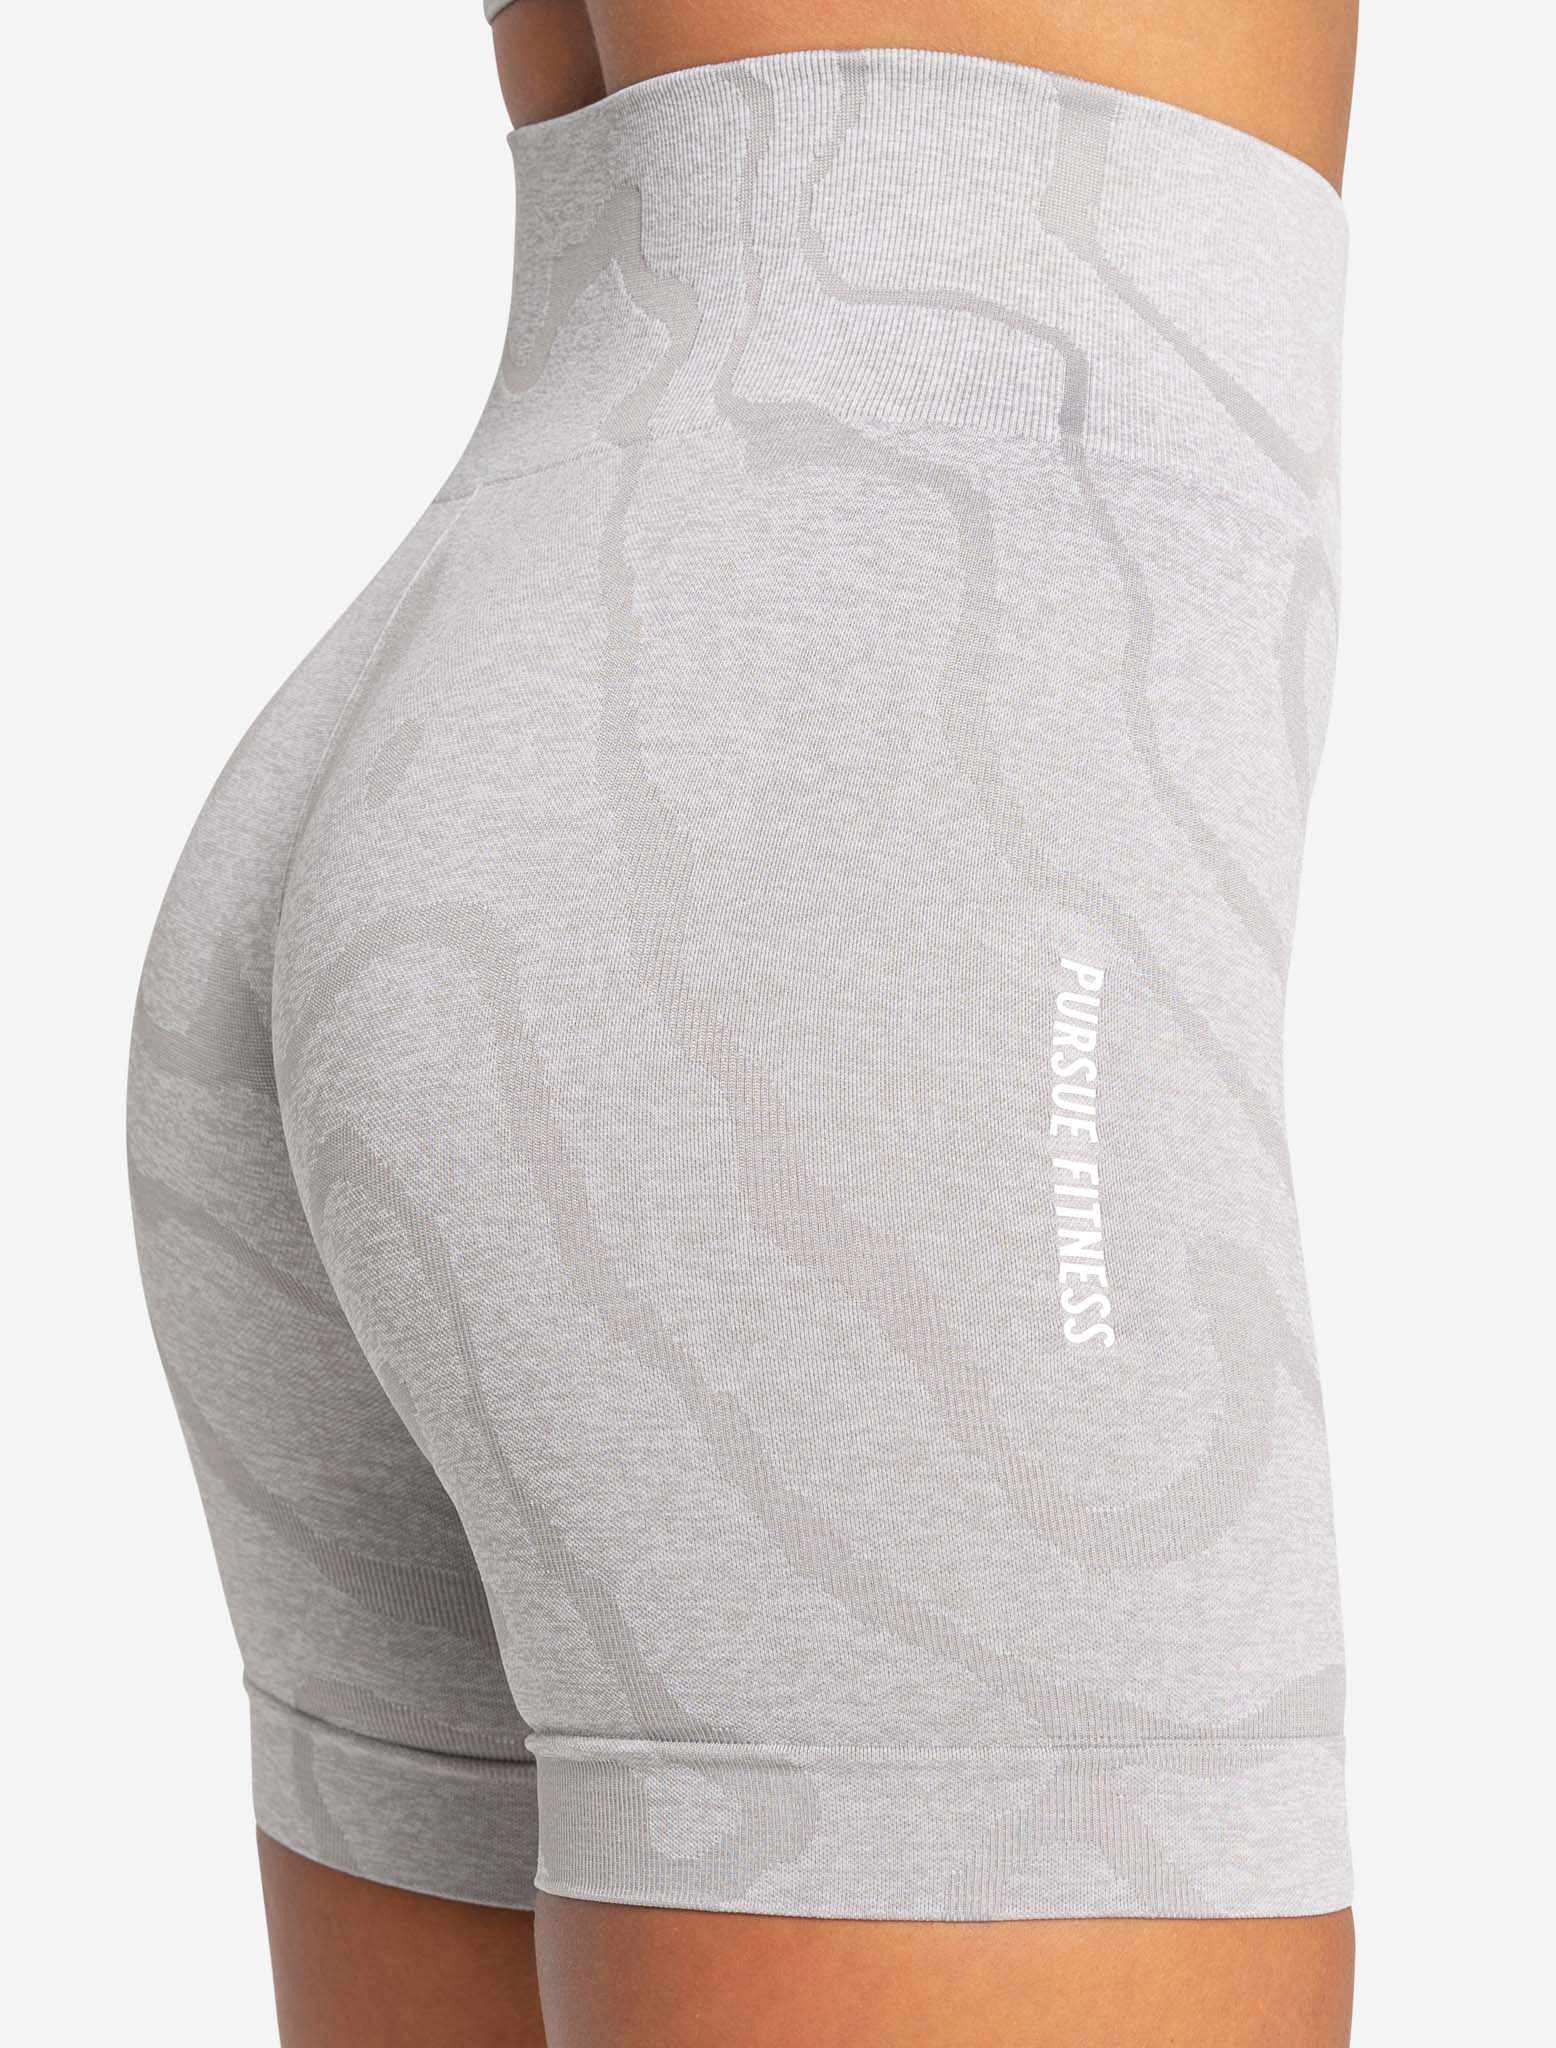 Sustainable Seamless Shorts / Cloud Grey Pursue Fitness 3